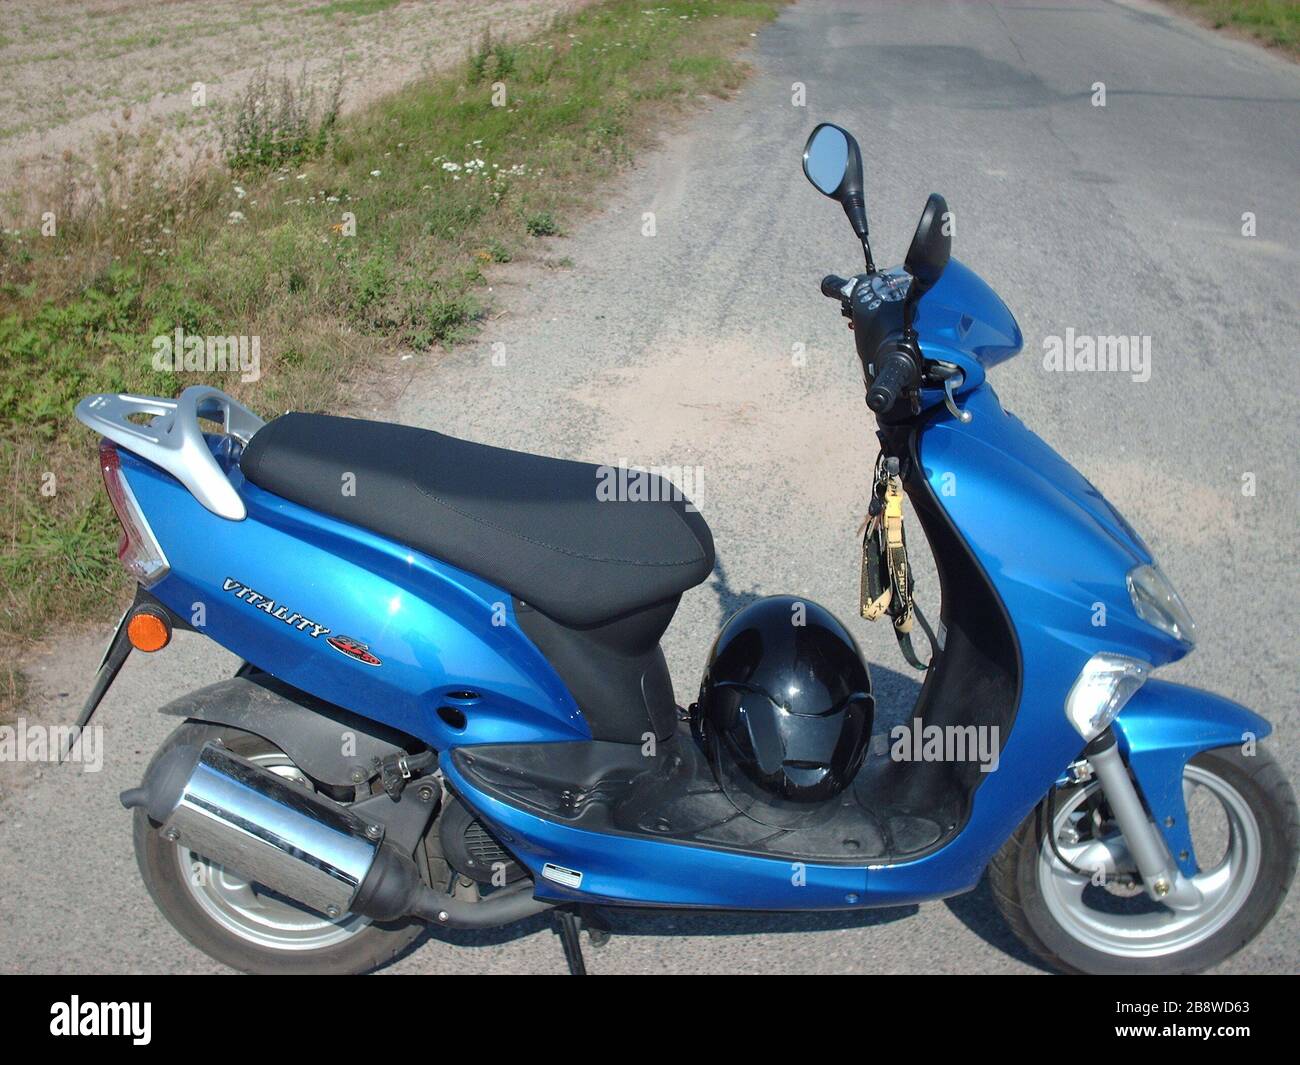 Sport På daglig basis sikring Polski: Scooter Kymco Vitality, 49 ccm.; 14 March 2009 (original upload  date); Transferred from pl.wikipedia; transferred to Commons by User:Masur  using CommonsHelper.; Original uploader was Verdemax at pl.wikipedia Stock  Photo - Alamy